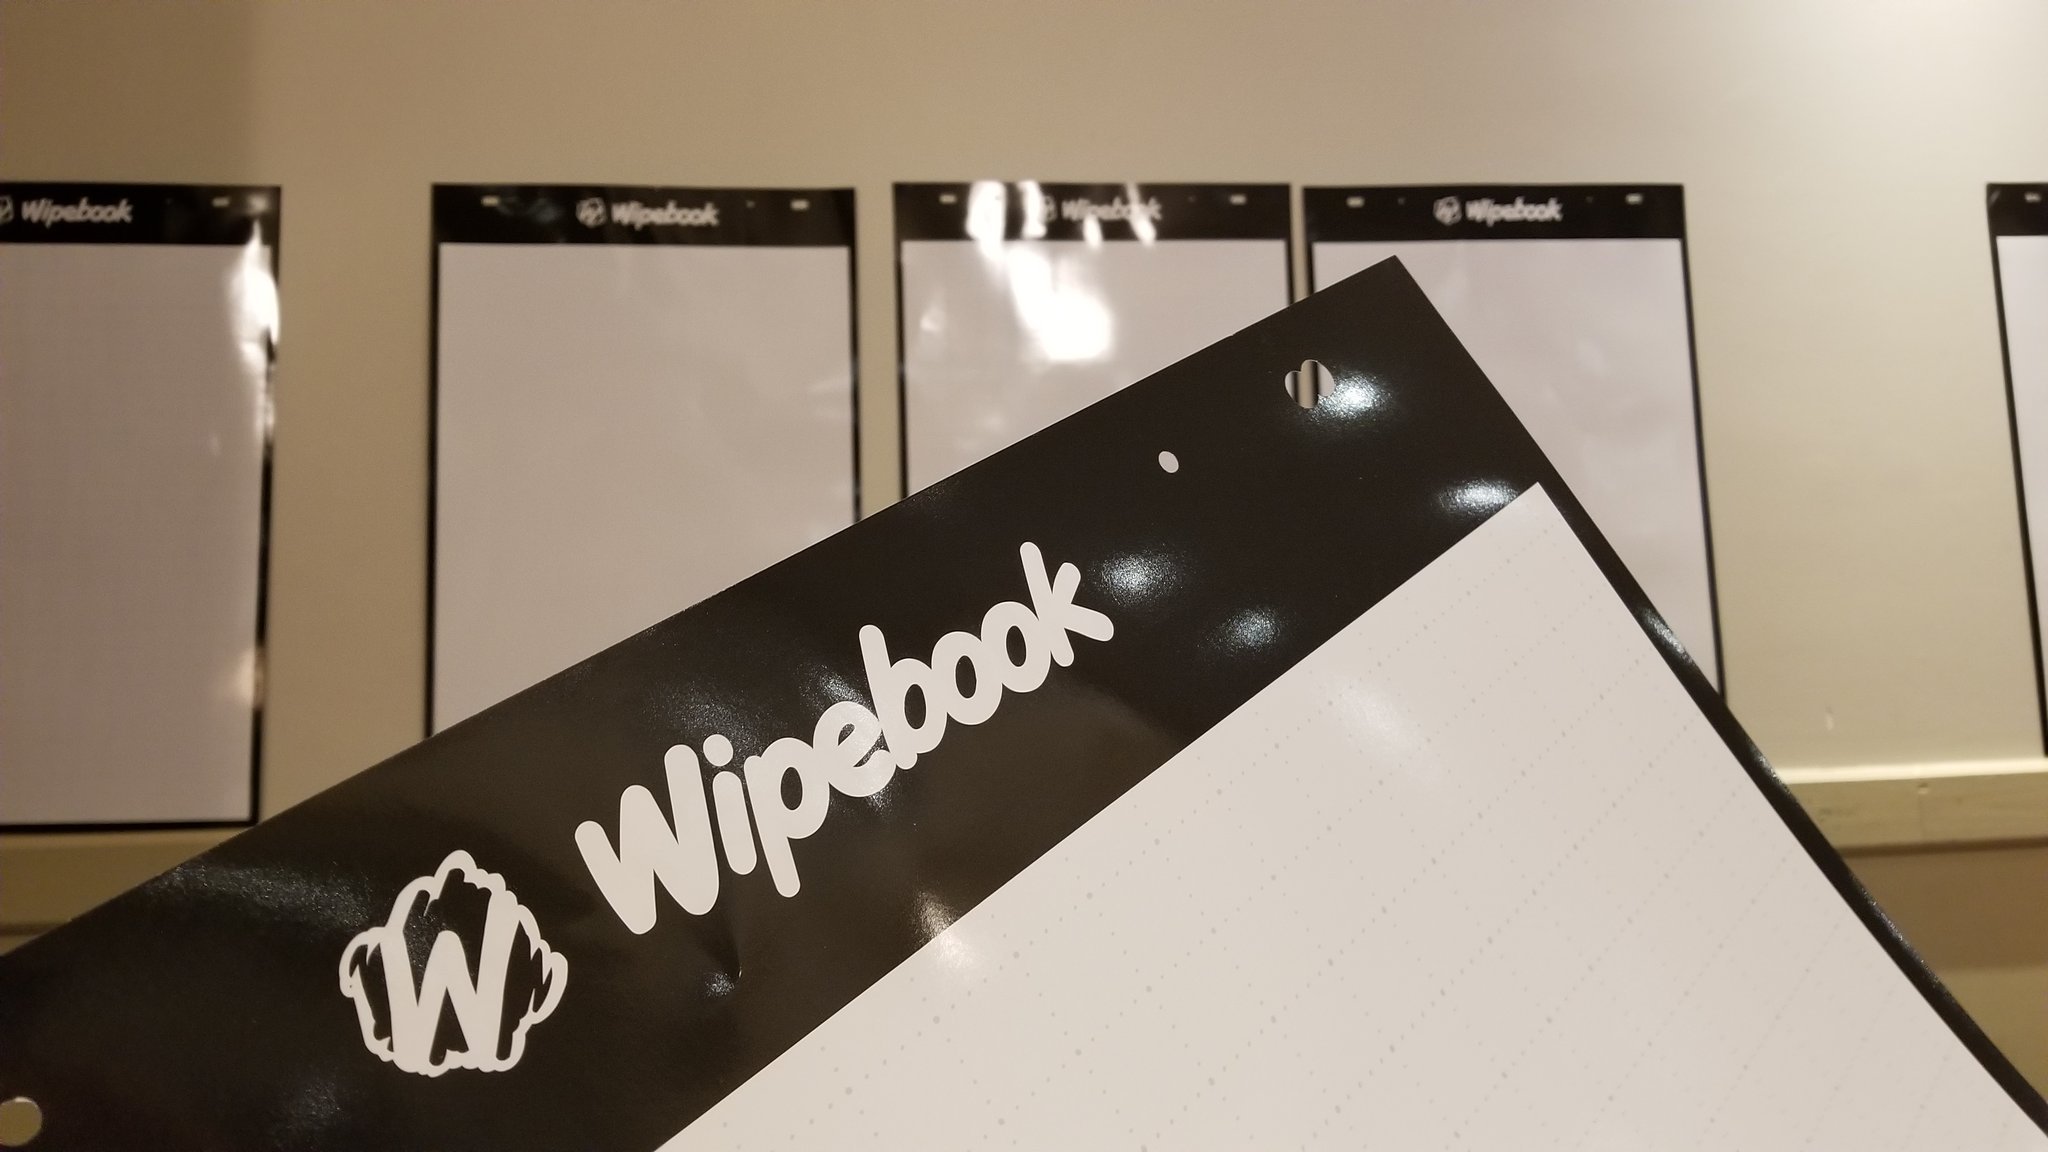 Team Wipebook on X: NEW #contest ALERT! Participate for a chance to win  our NEW Flipchart Mini Heavy Duty! How to enter: 1) Follow @Wipebook 2)  Retweet this post 3) Tag 2